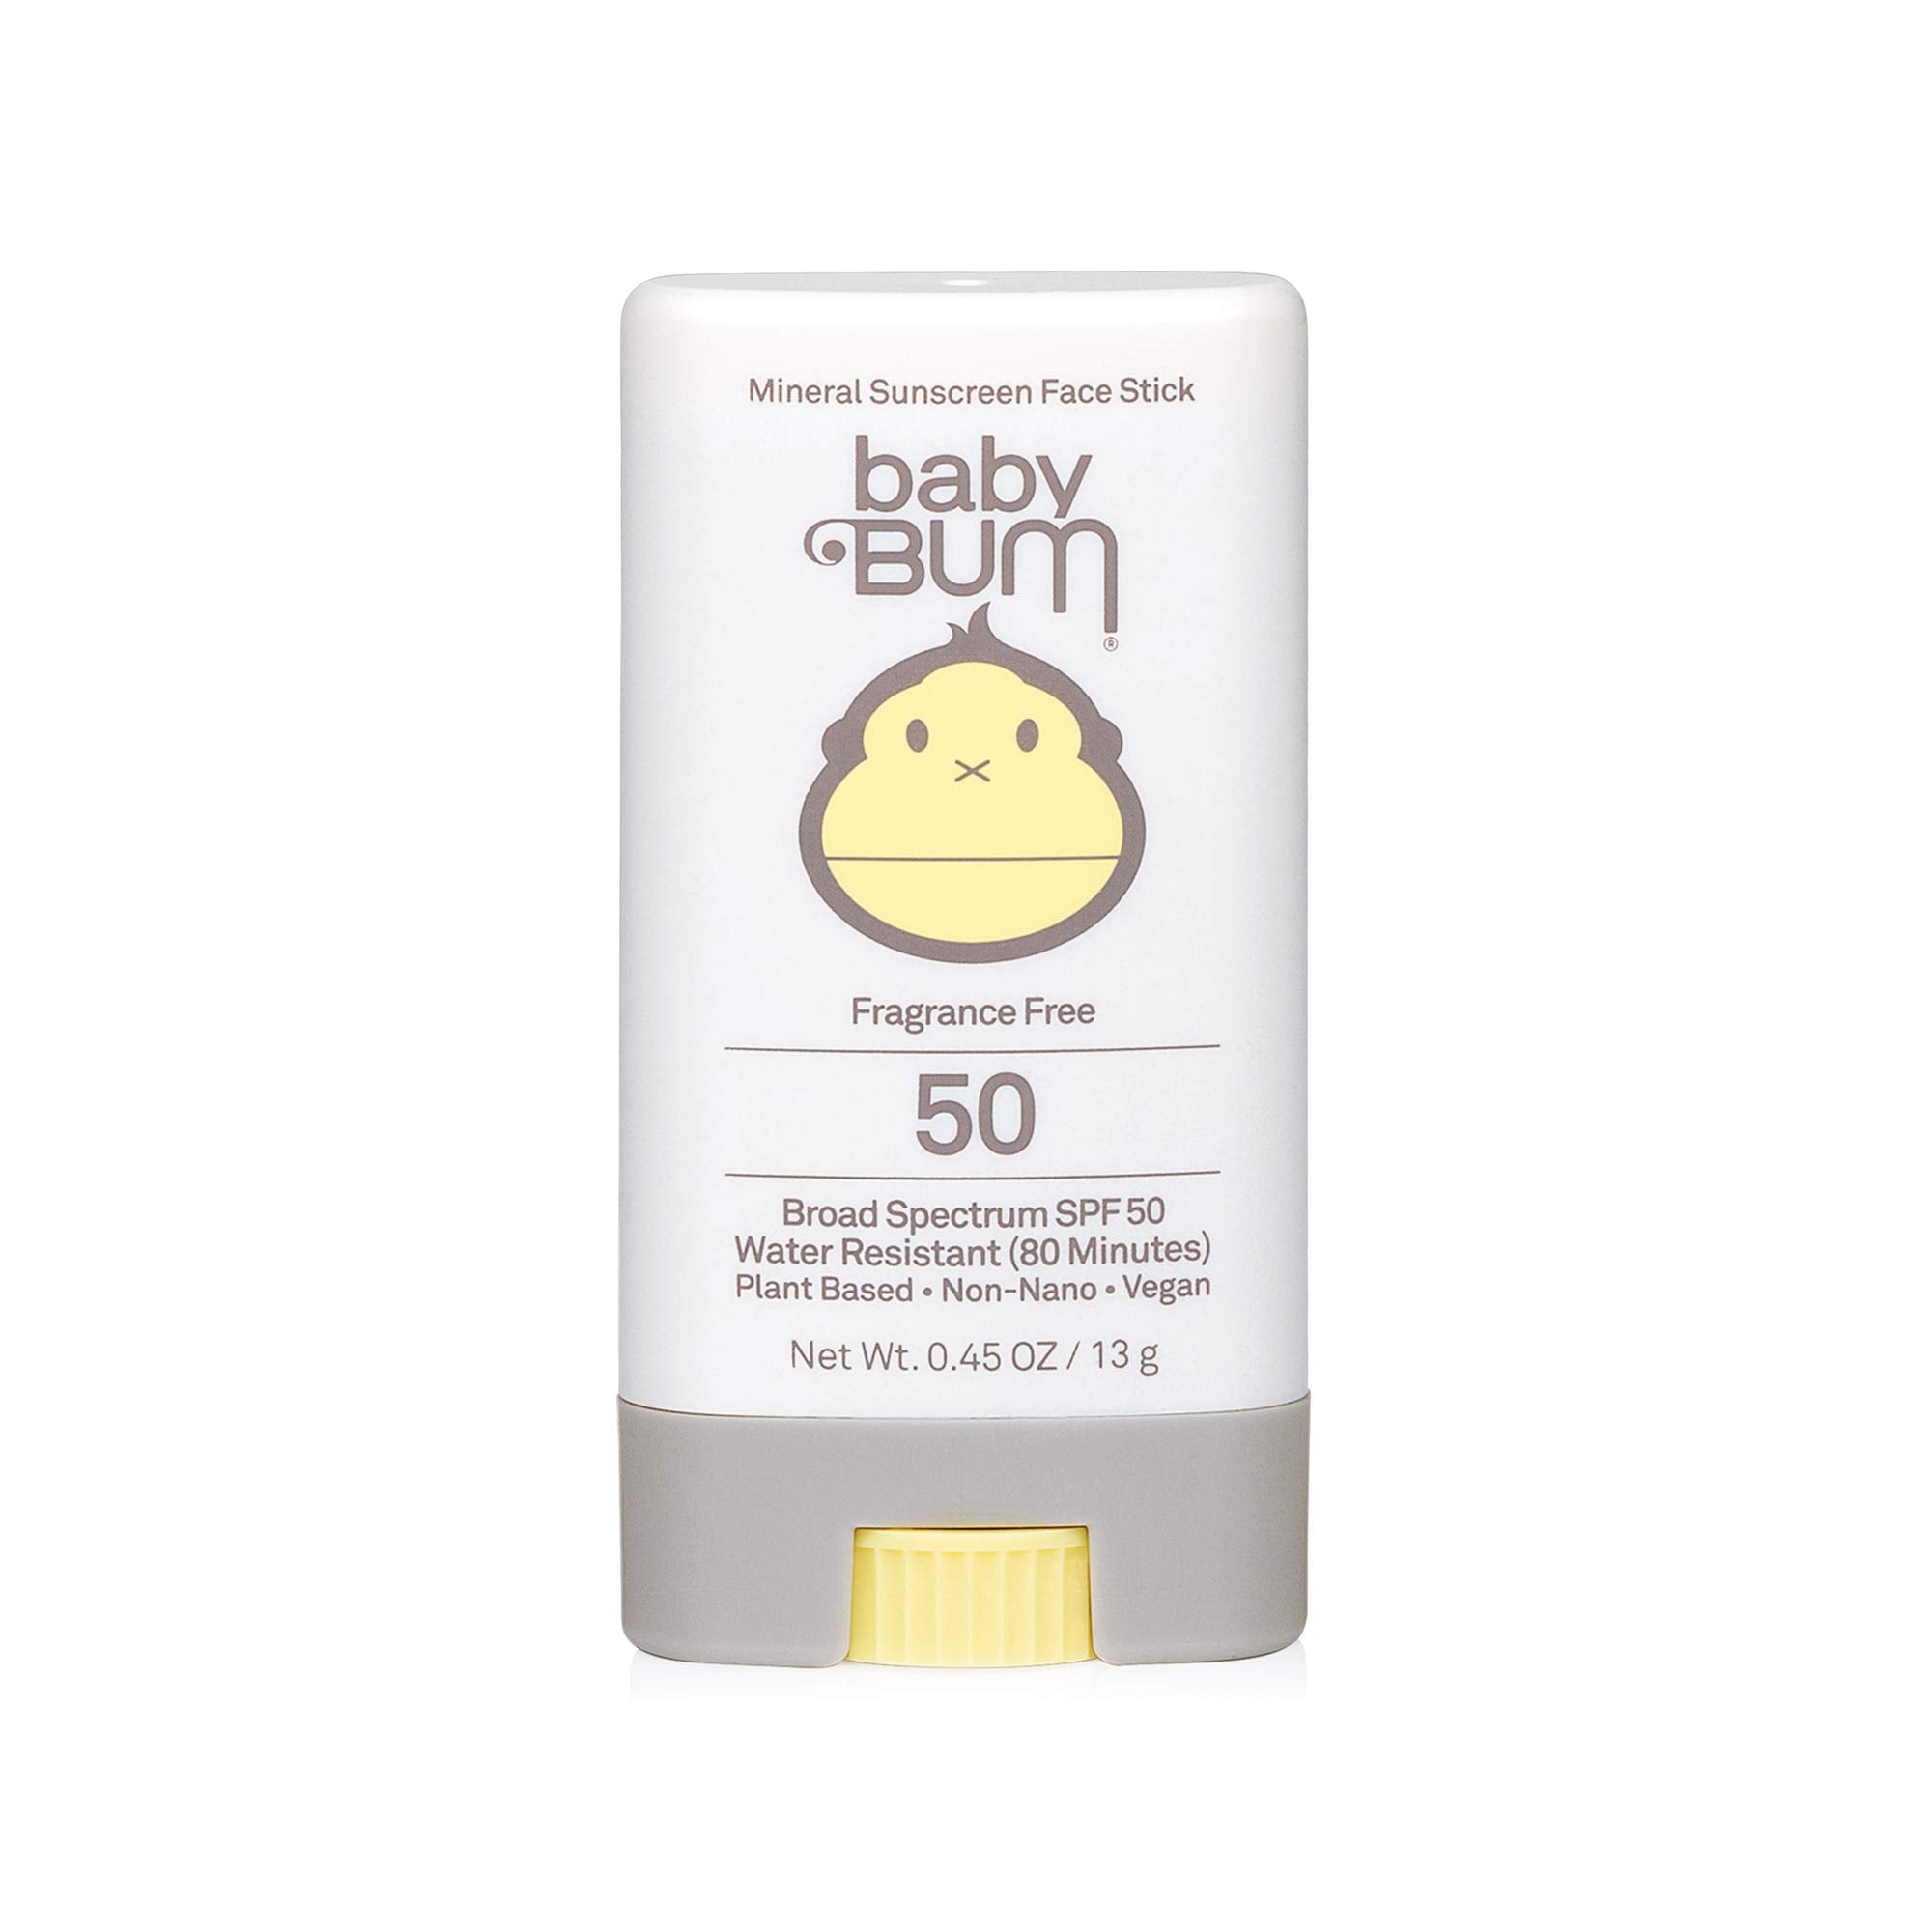 Baby Bum - Mineral Sunscreen Face Stick Fragrance Free 50 SPF - 0.45 oz.